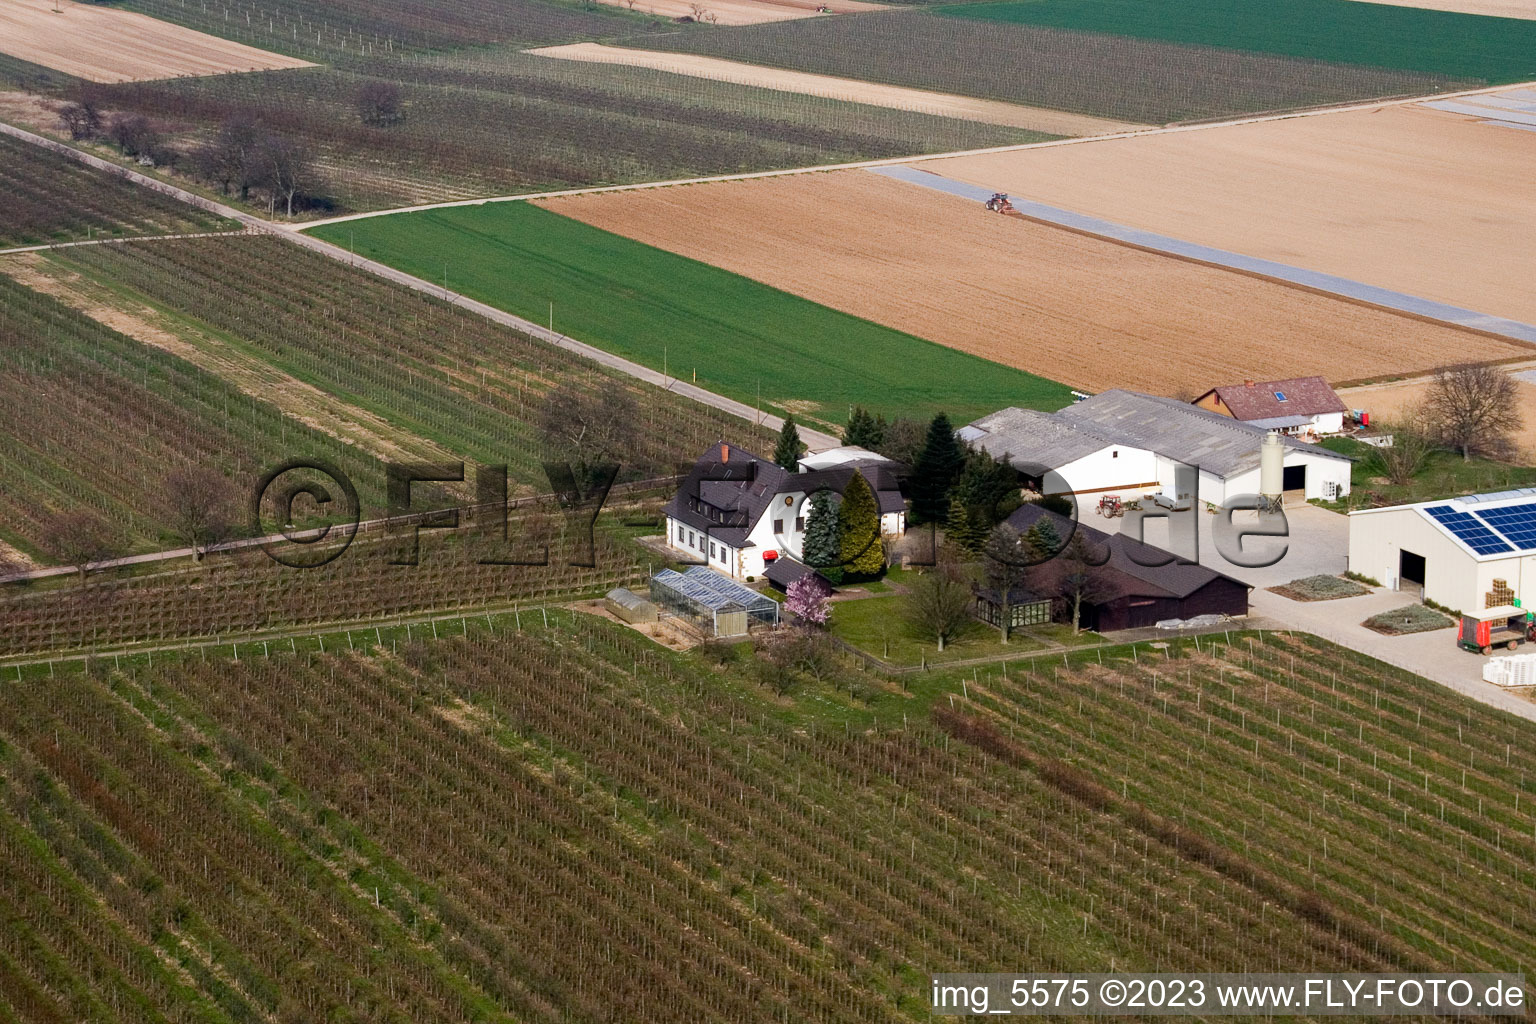 Farmer's garden in Winden in the state Rhineland-Palatinate, Germany from the plane